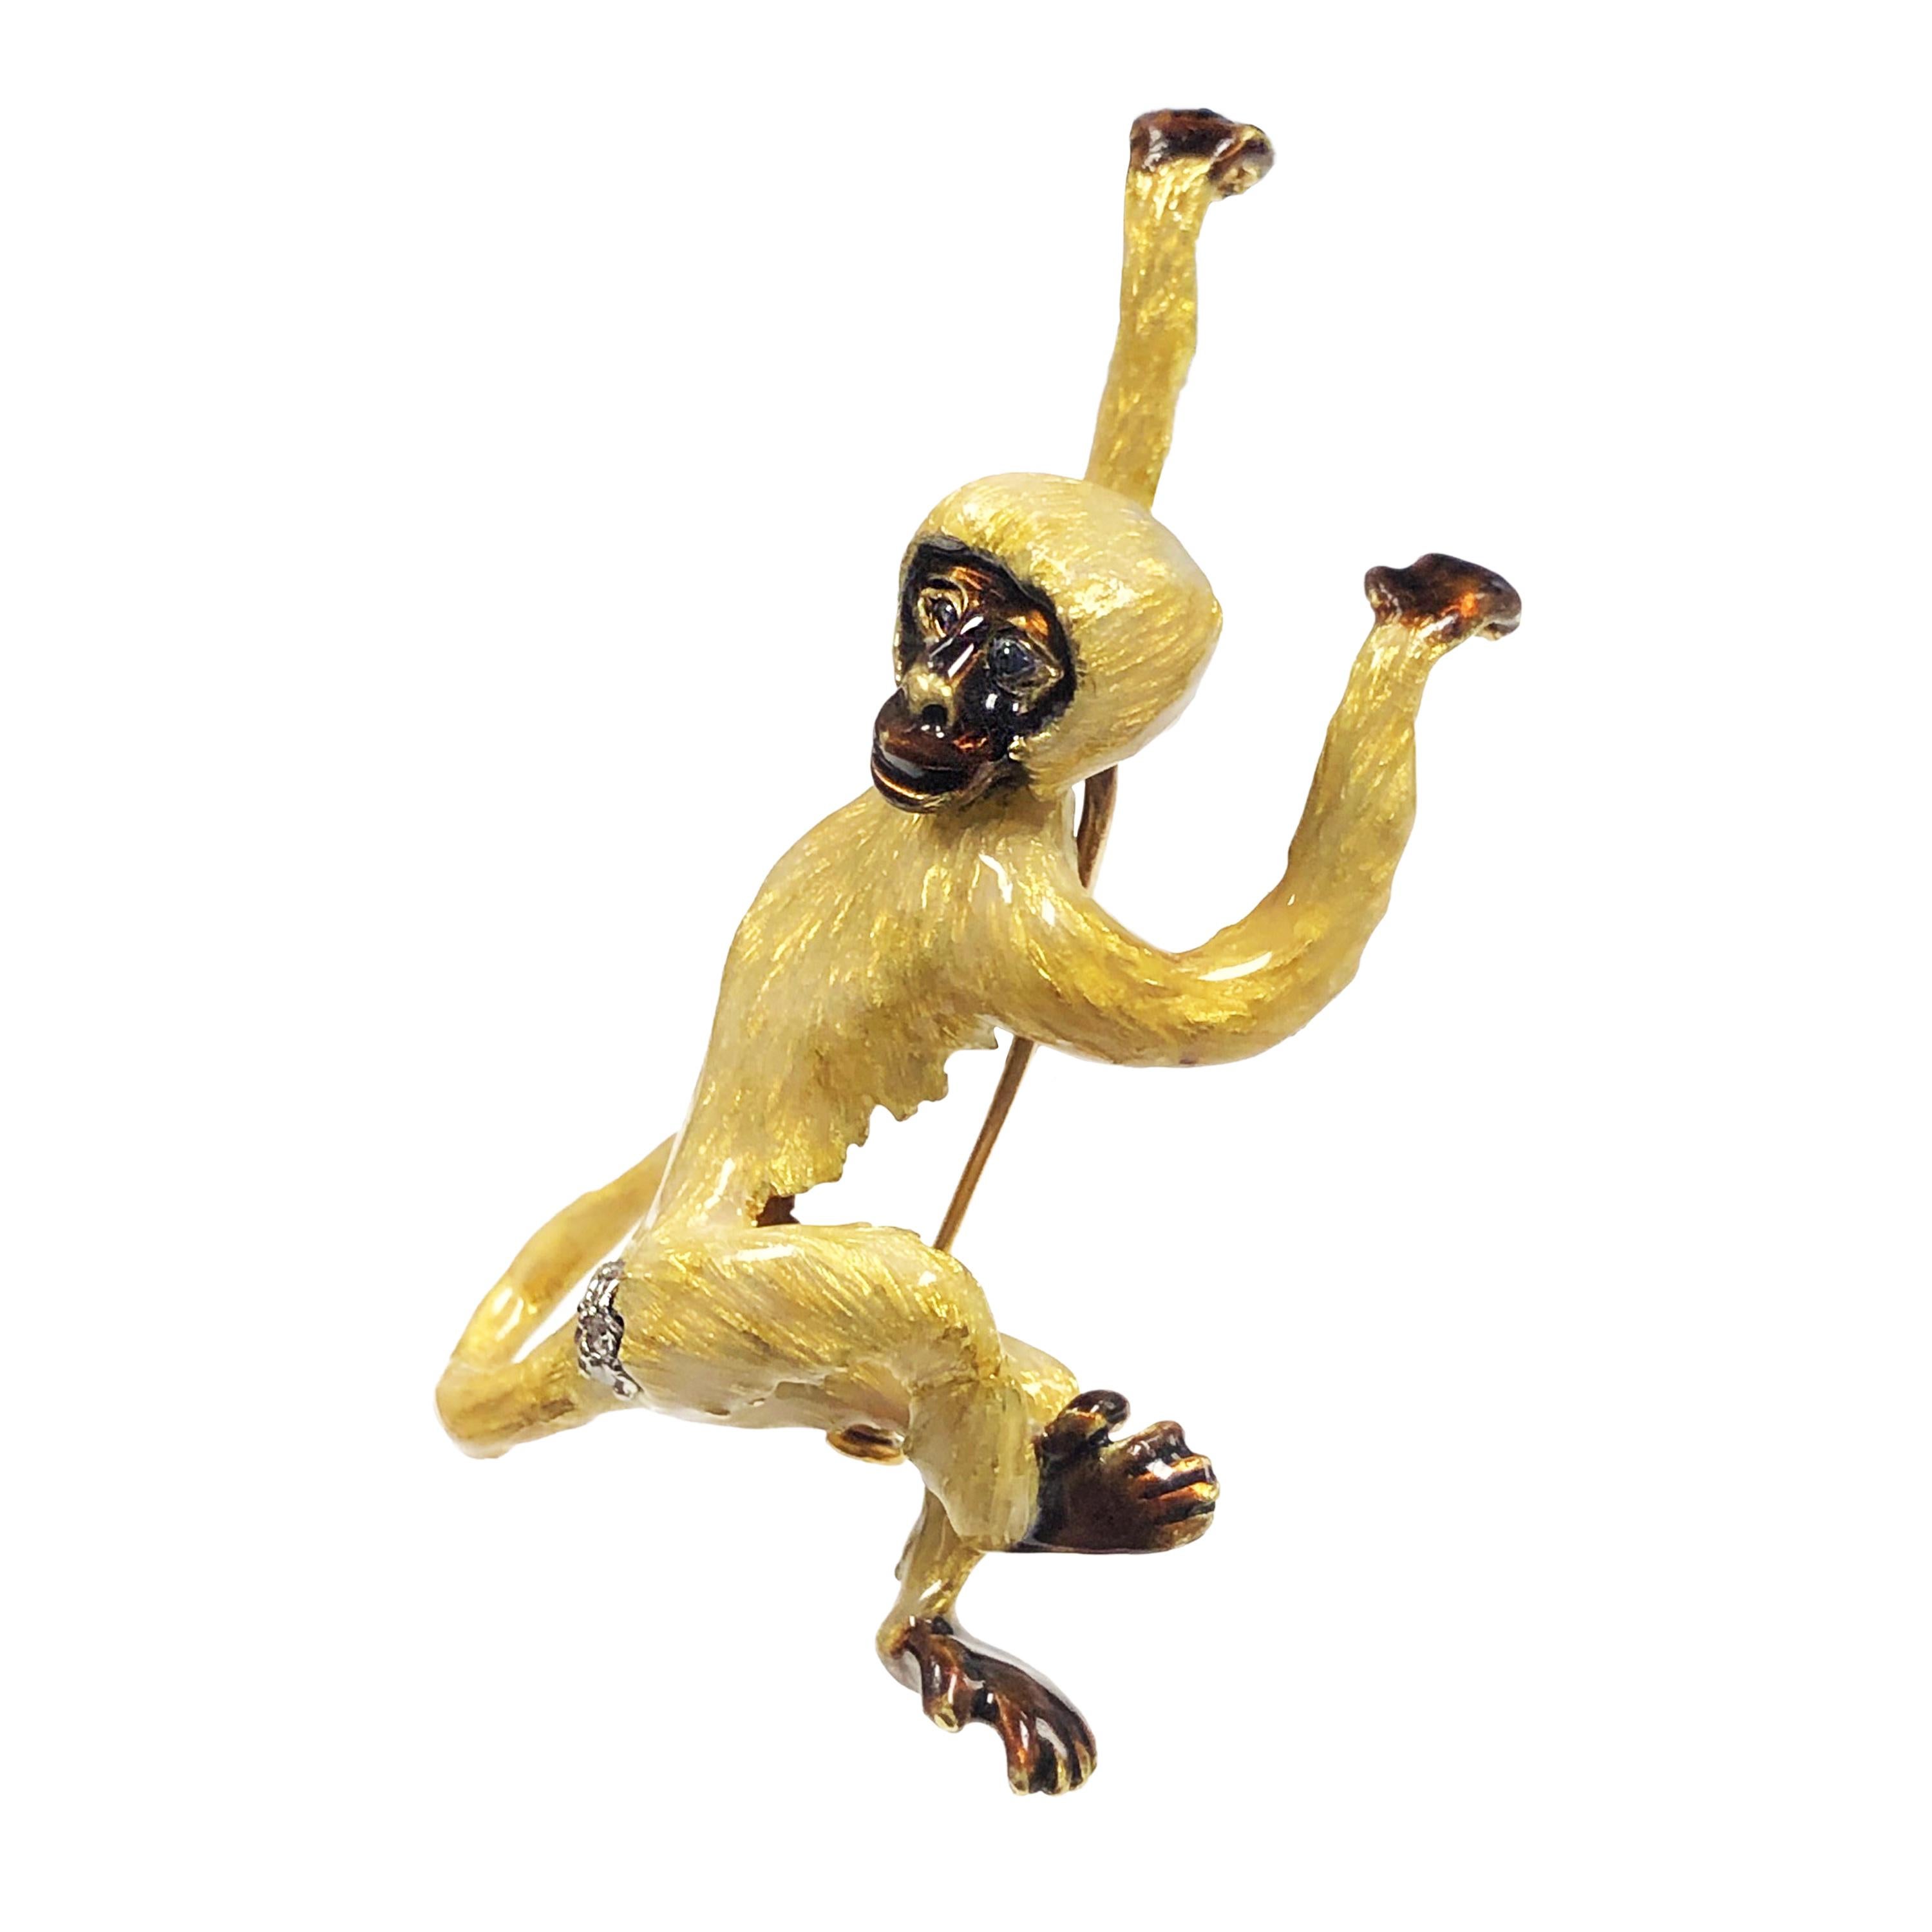 Circa 1970s Very Whimsical 18K Yellow Gold Monkey Brooch, measuring 2 1/4 inches in length X 1 3/8 inch wide. This detailed piece is completely finished in a light Tan - Yellow Guilloche Enamel with Brown Hands and Feet and a Brown Face. Sapphire